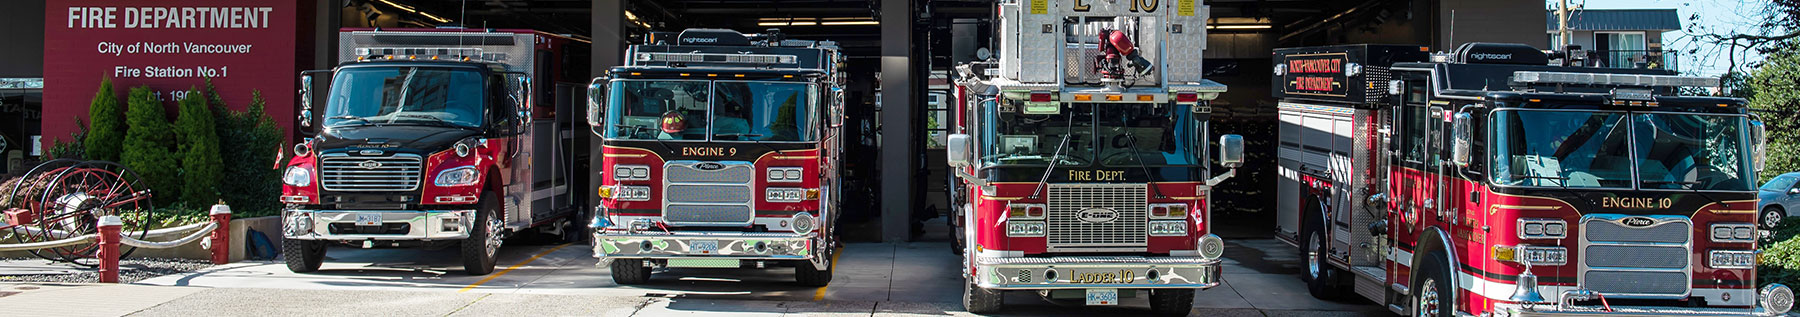 fire trucks parked at fire hall